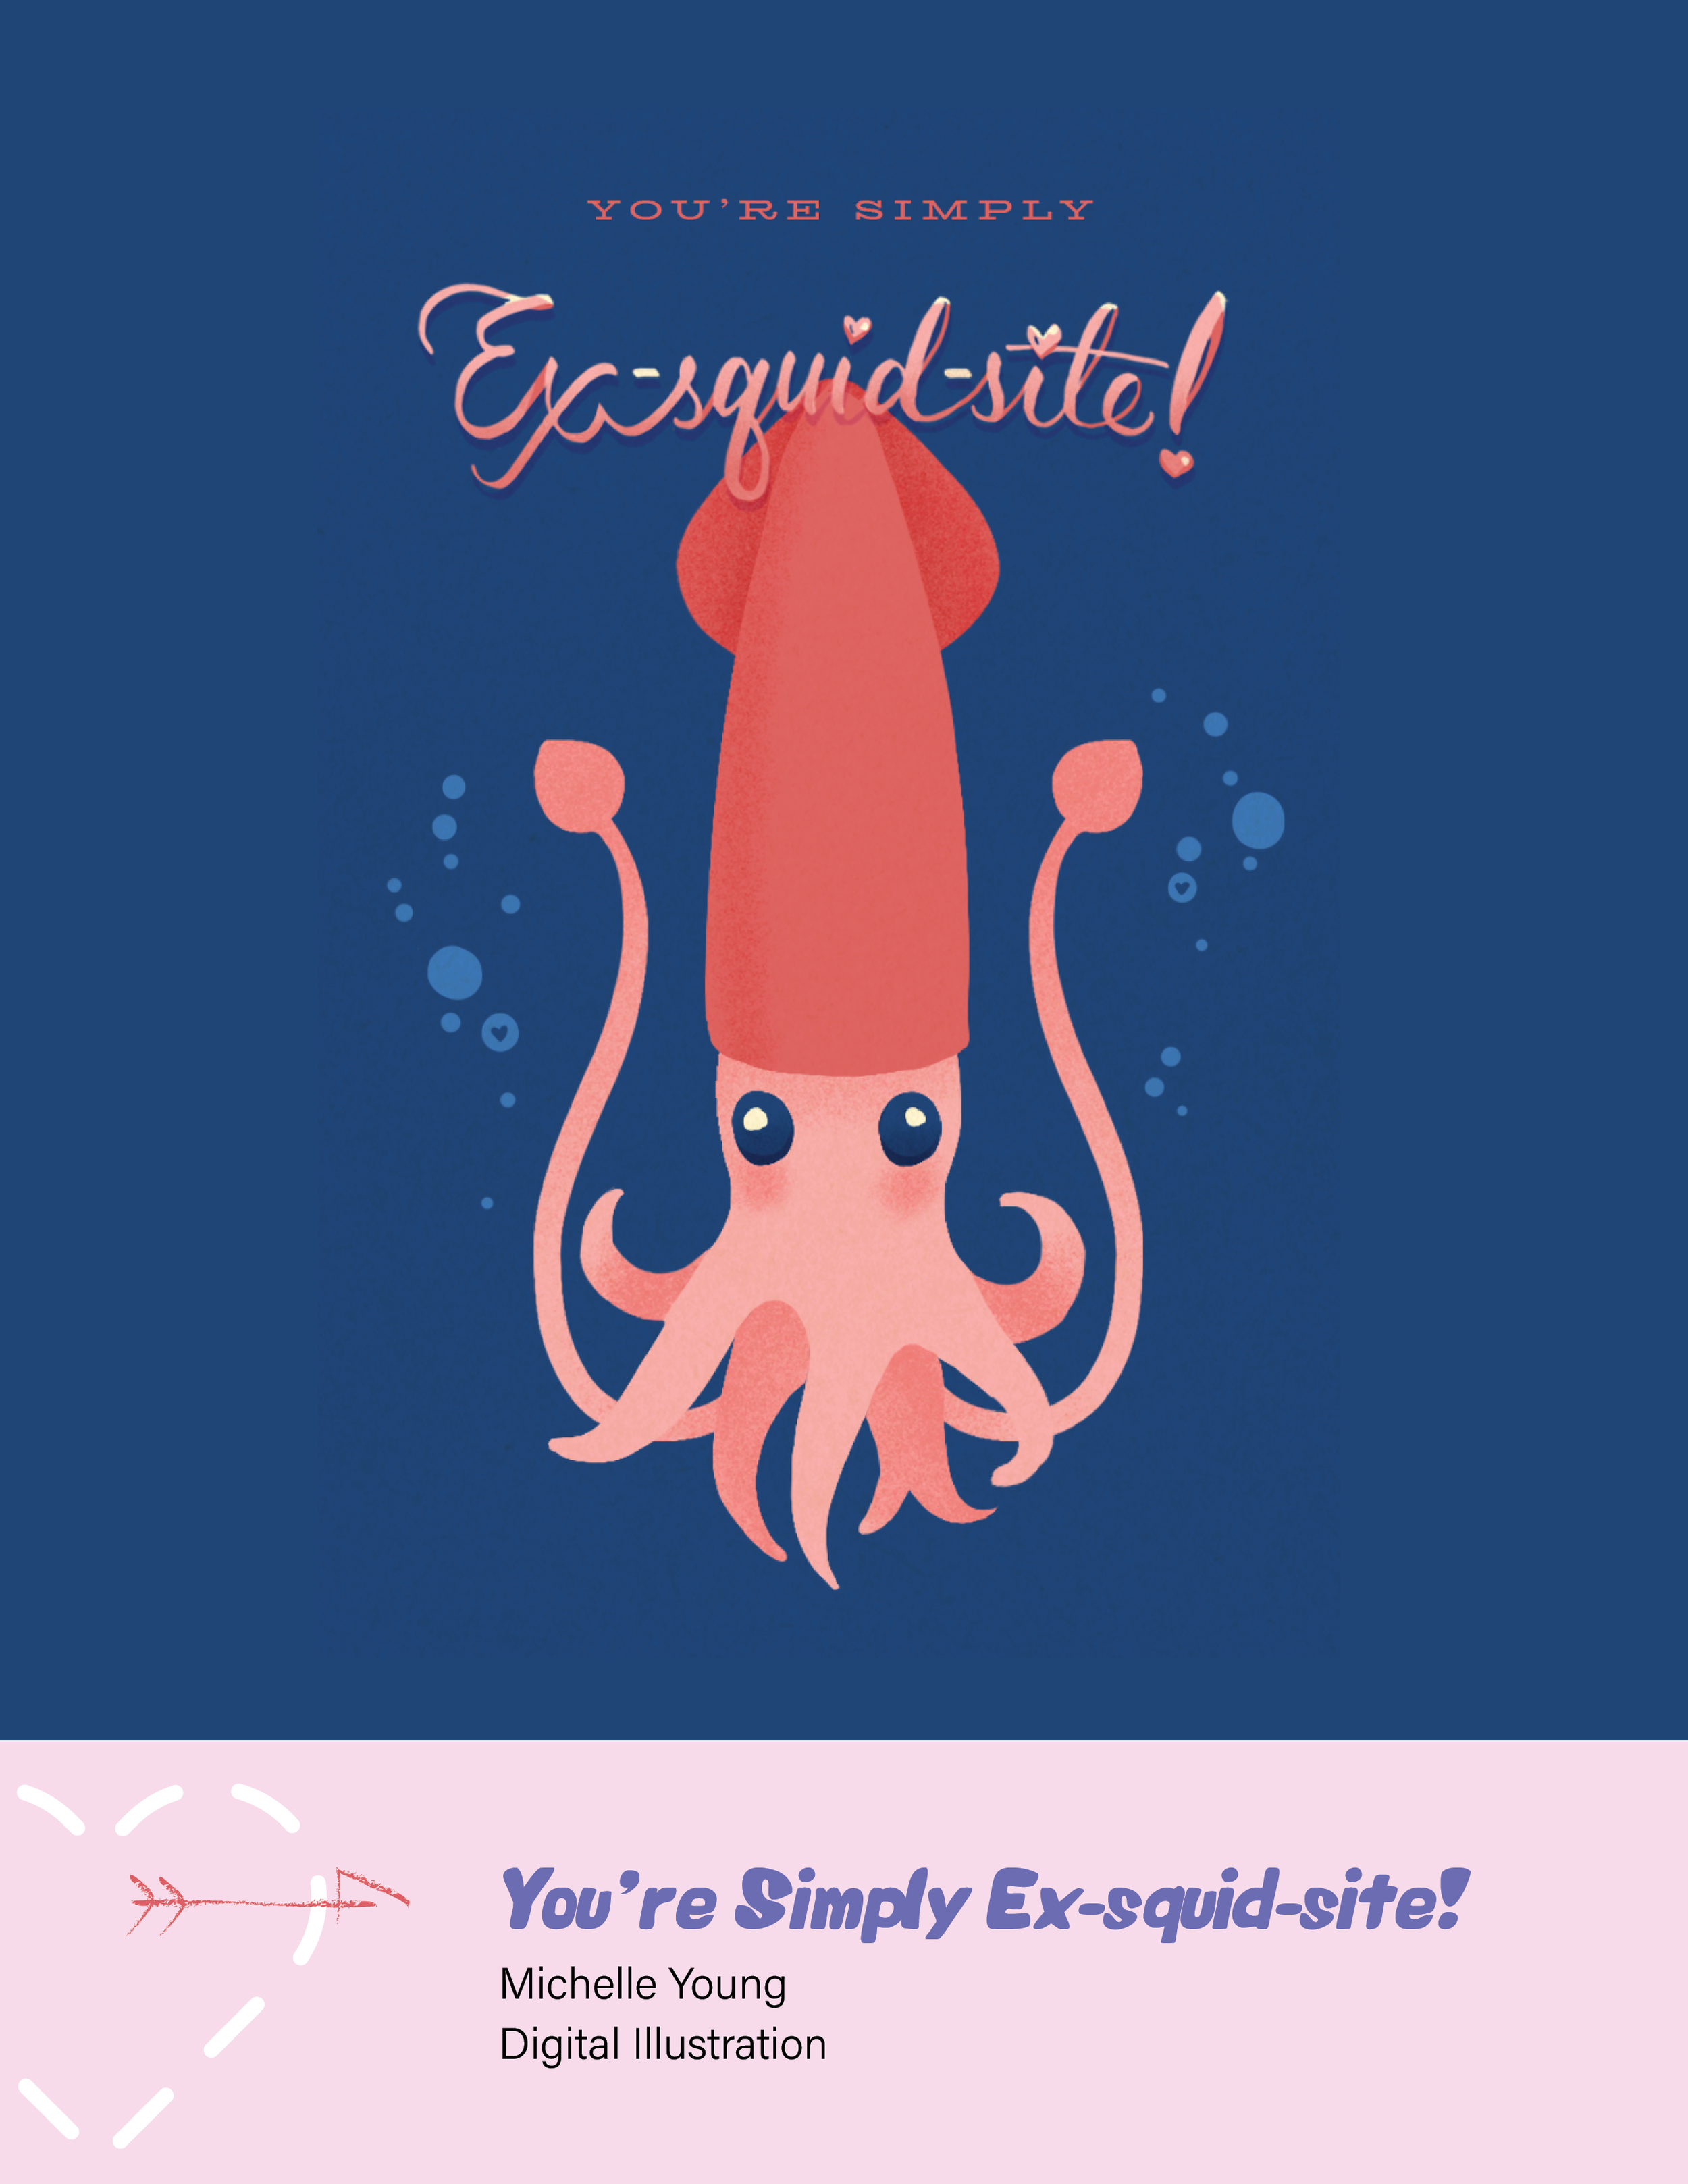 "You're Simply Ex-SQUID-site" by Michelle Young